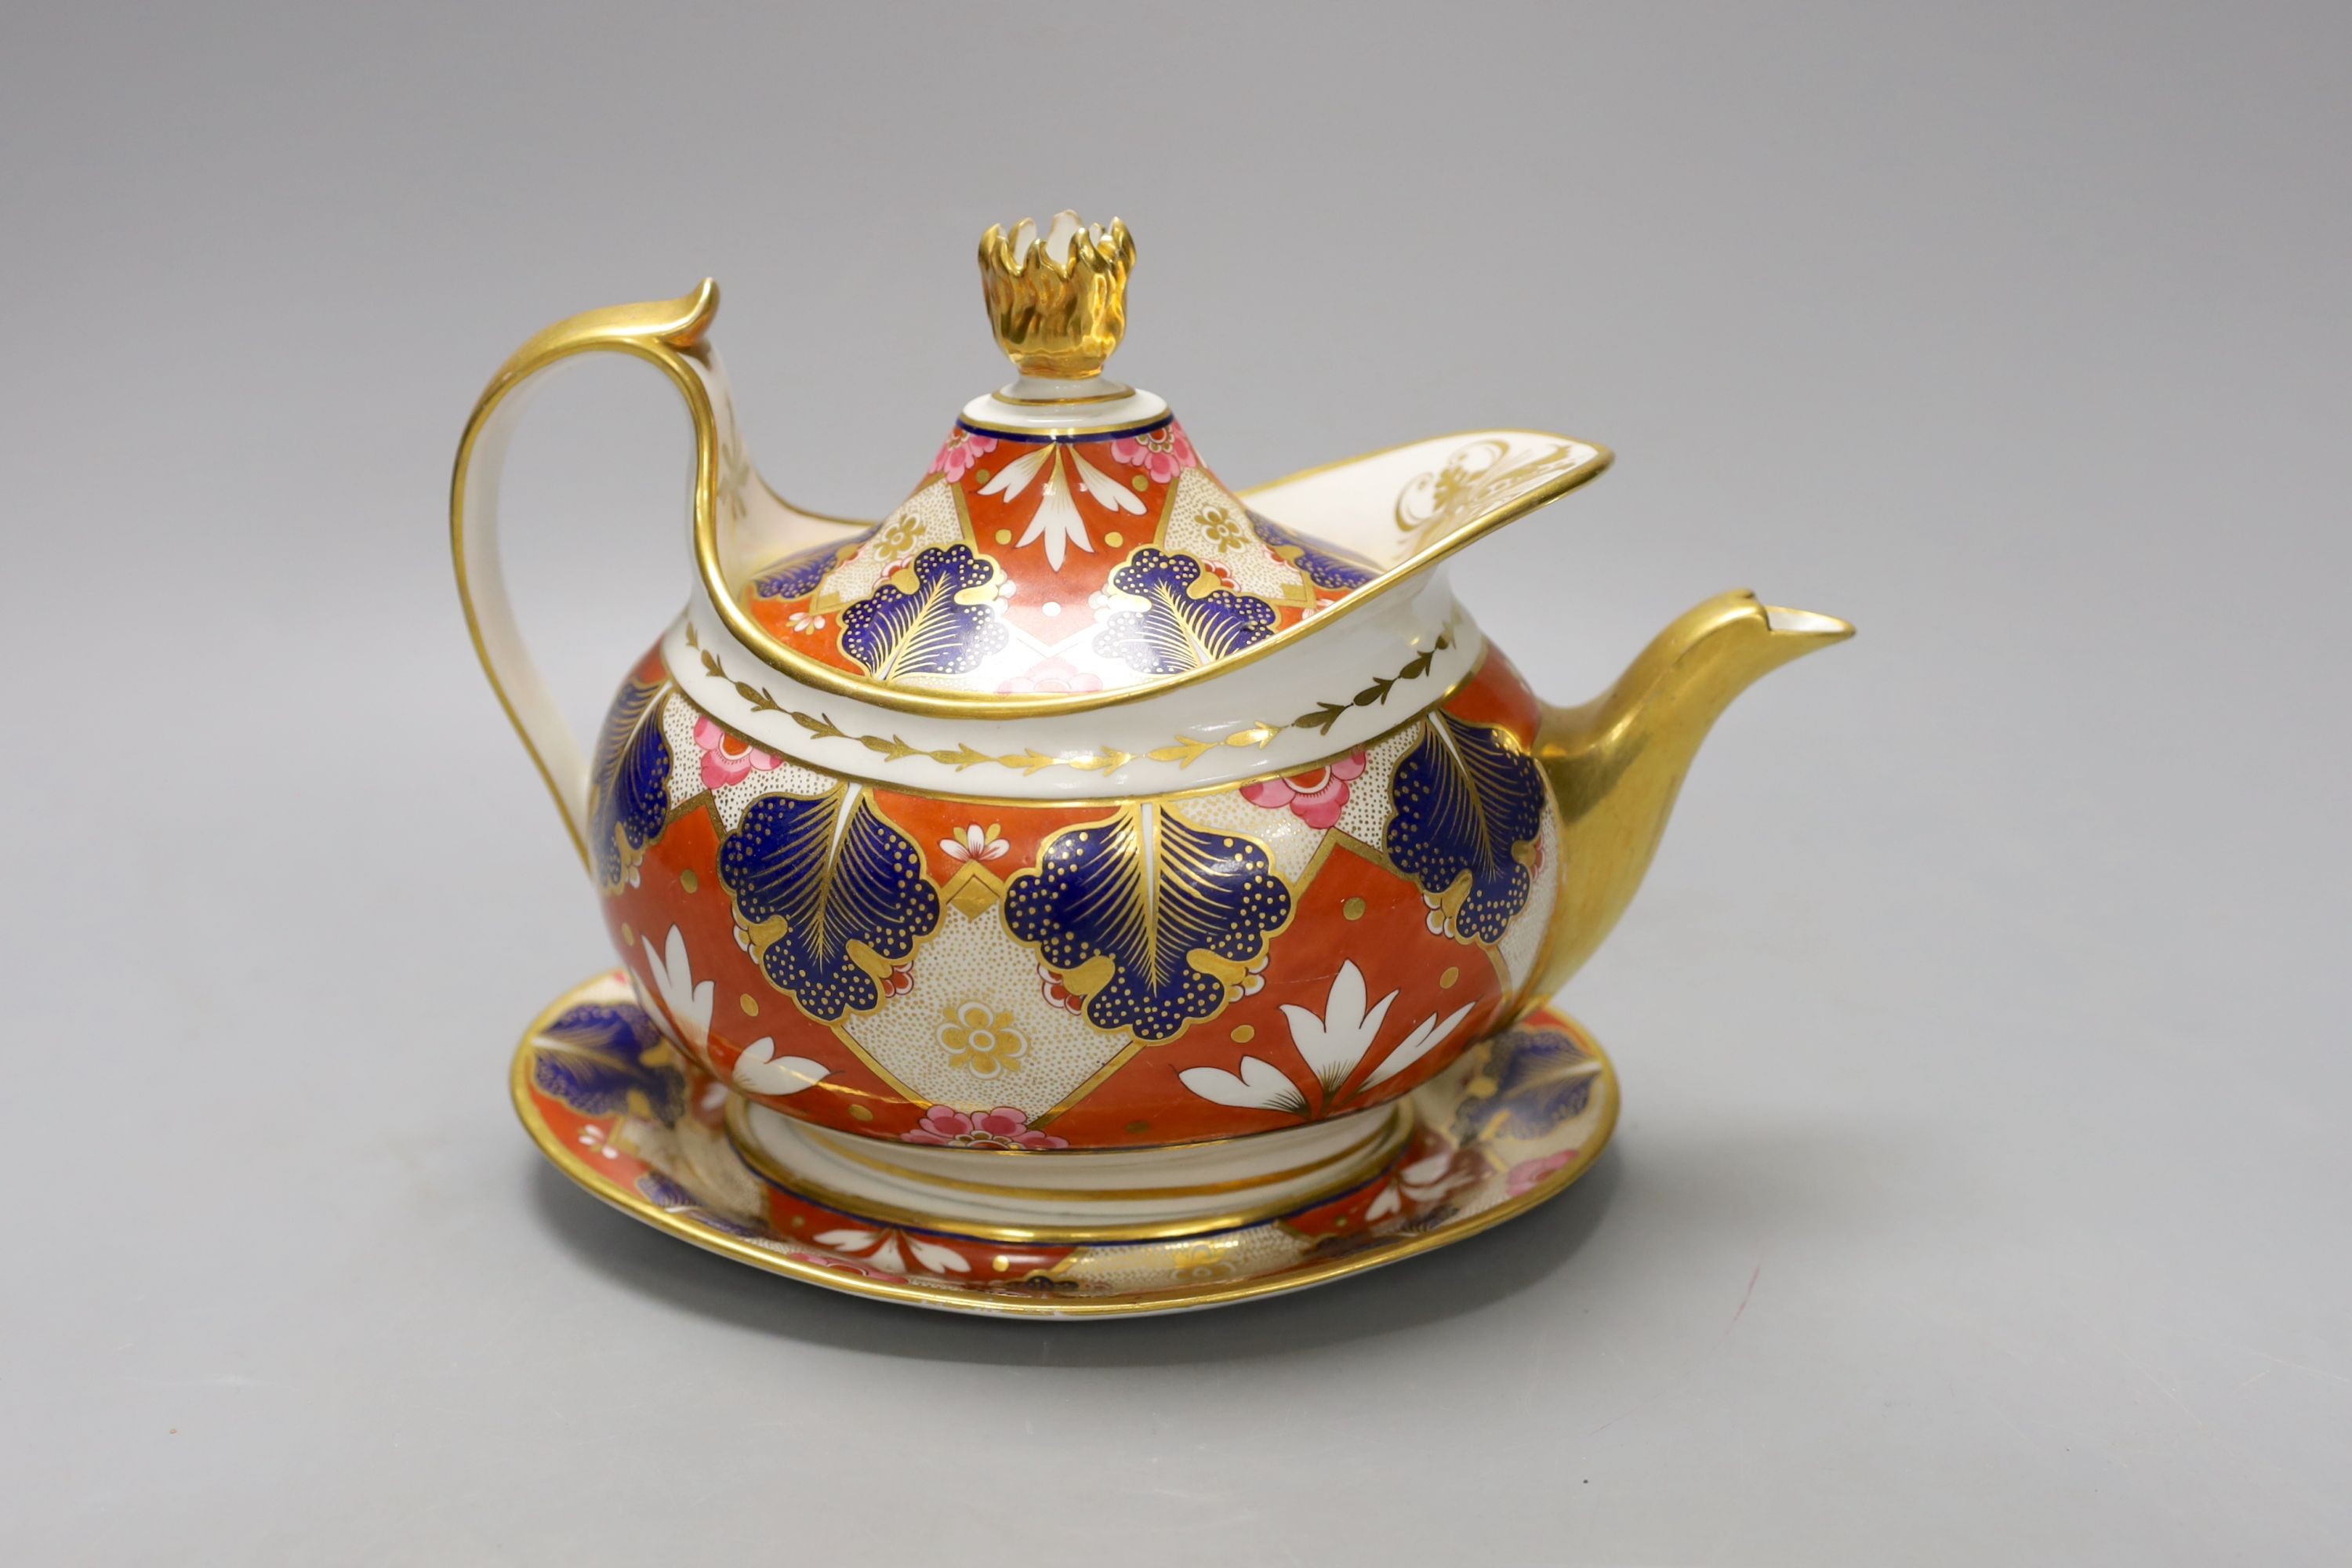 A Barr Flight and Barr Worcester teapot cover and stand painted with an Imari pattern, c.1805, 23 cm long